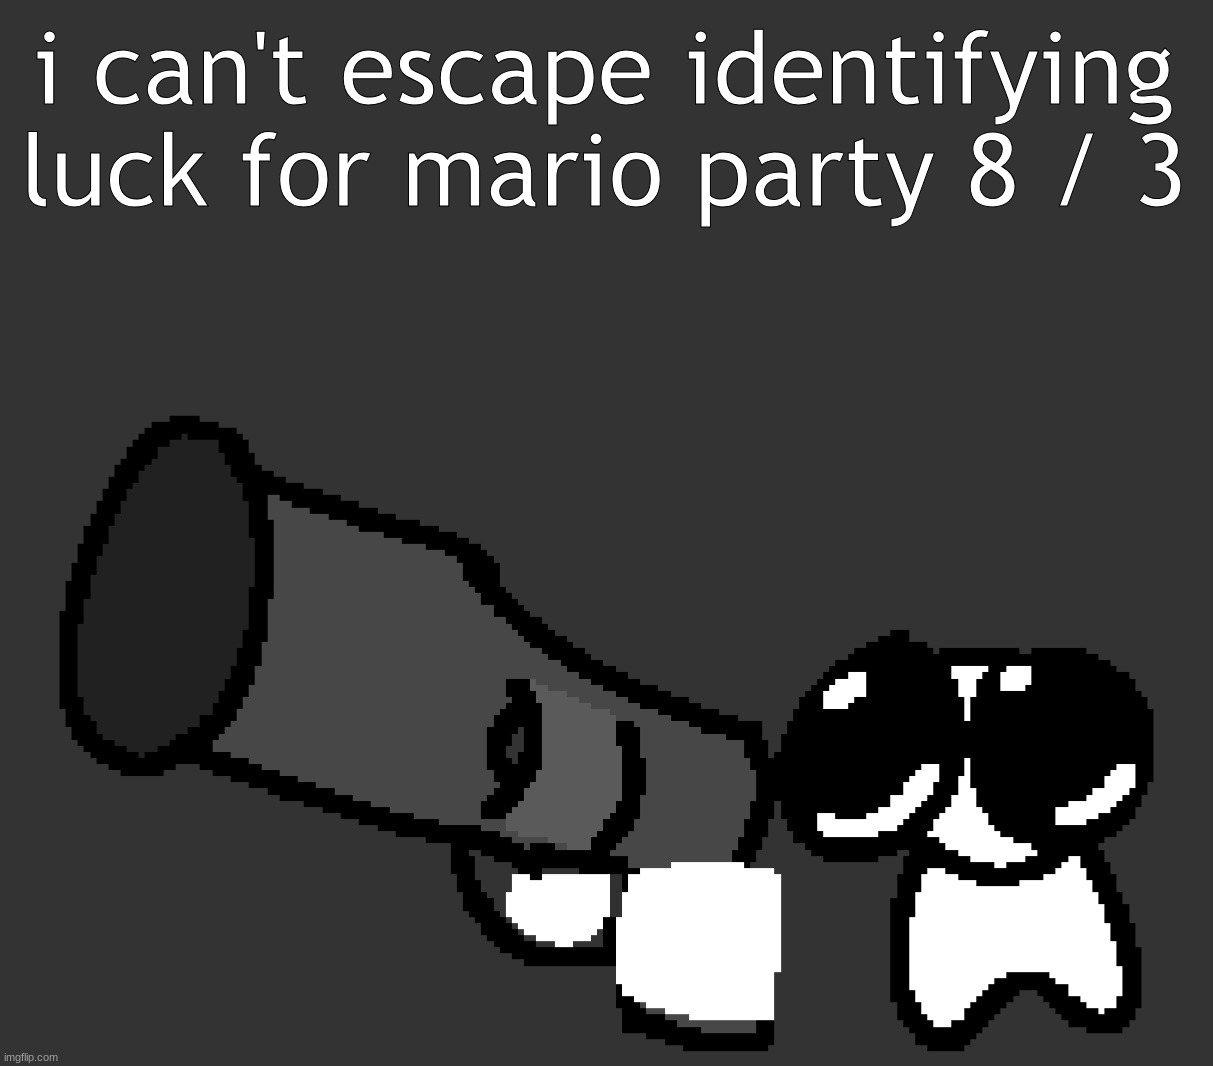 gremlin | i can't escape identifying luck for mario party 8 / 3 | image tagged in gremlin | made w/ Imgflip meme maker